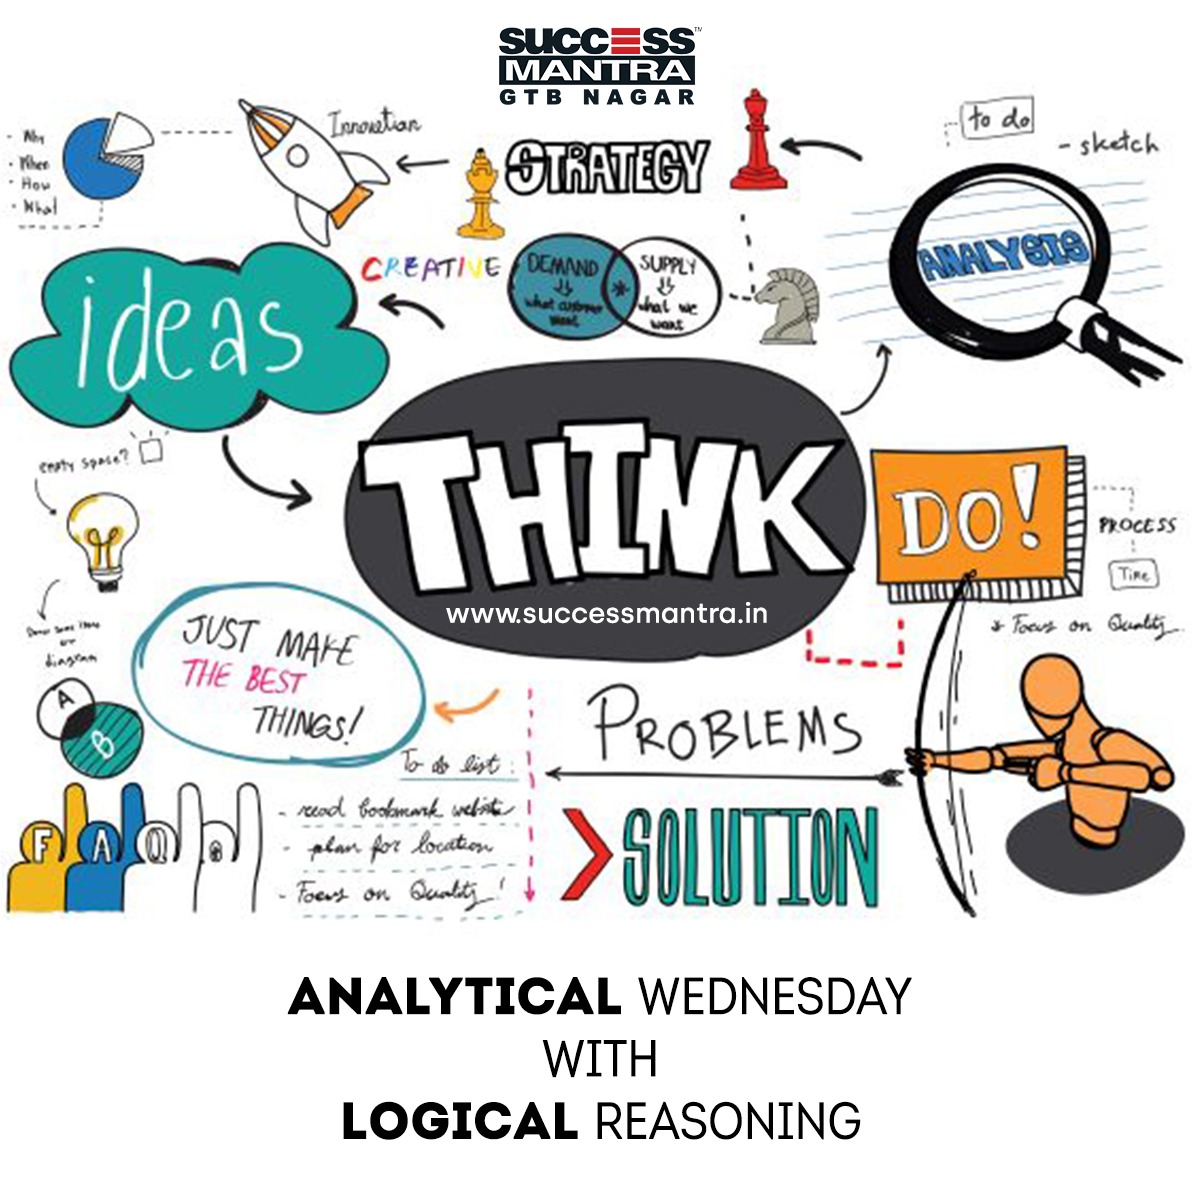 Questions on Logical Reasoning SMLRQ037